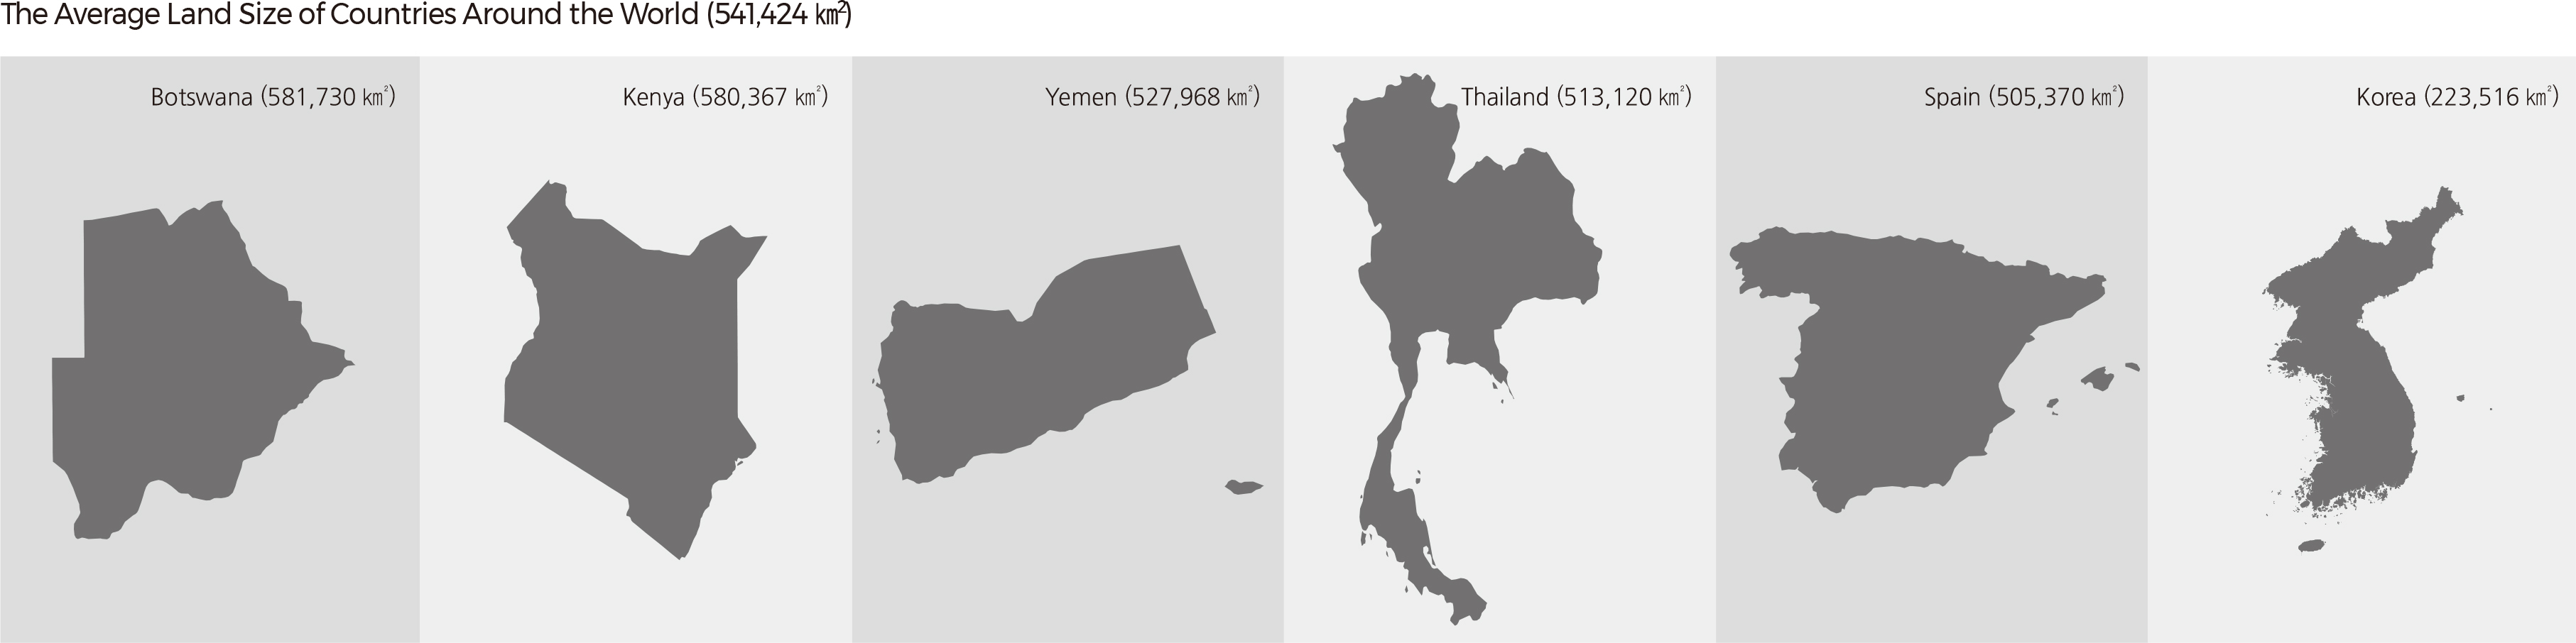 The Average Land Size of Countries Around the World (541,424 km2)